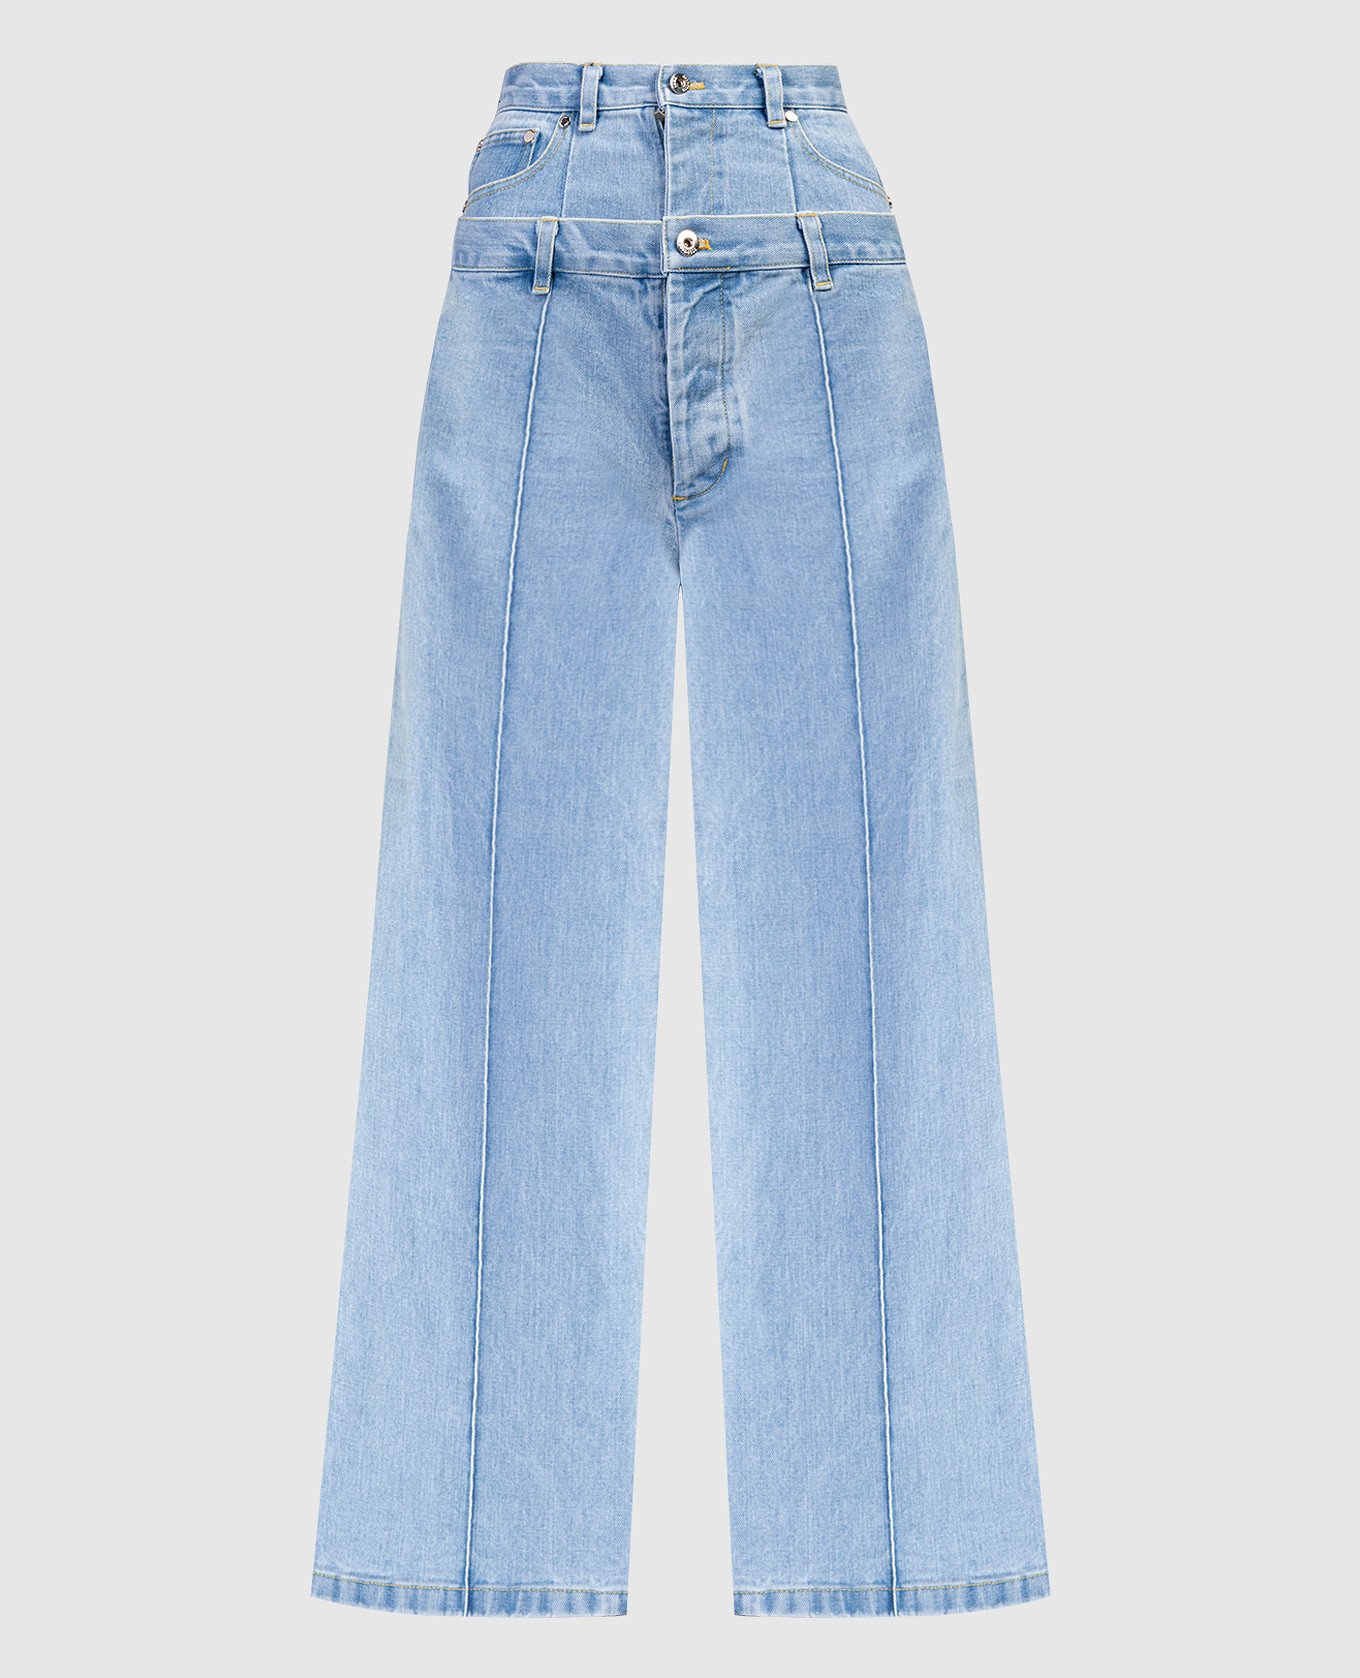 Blue jeans with double construction